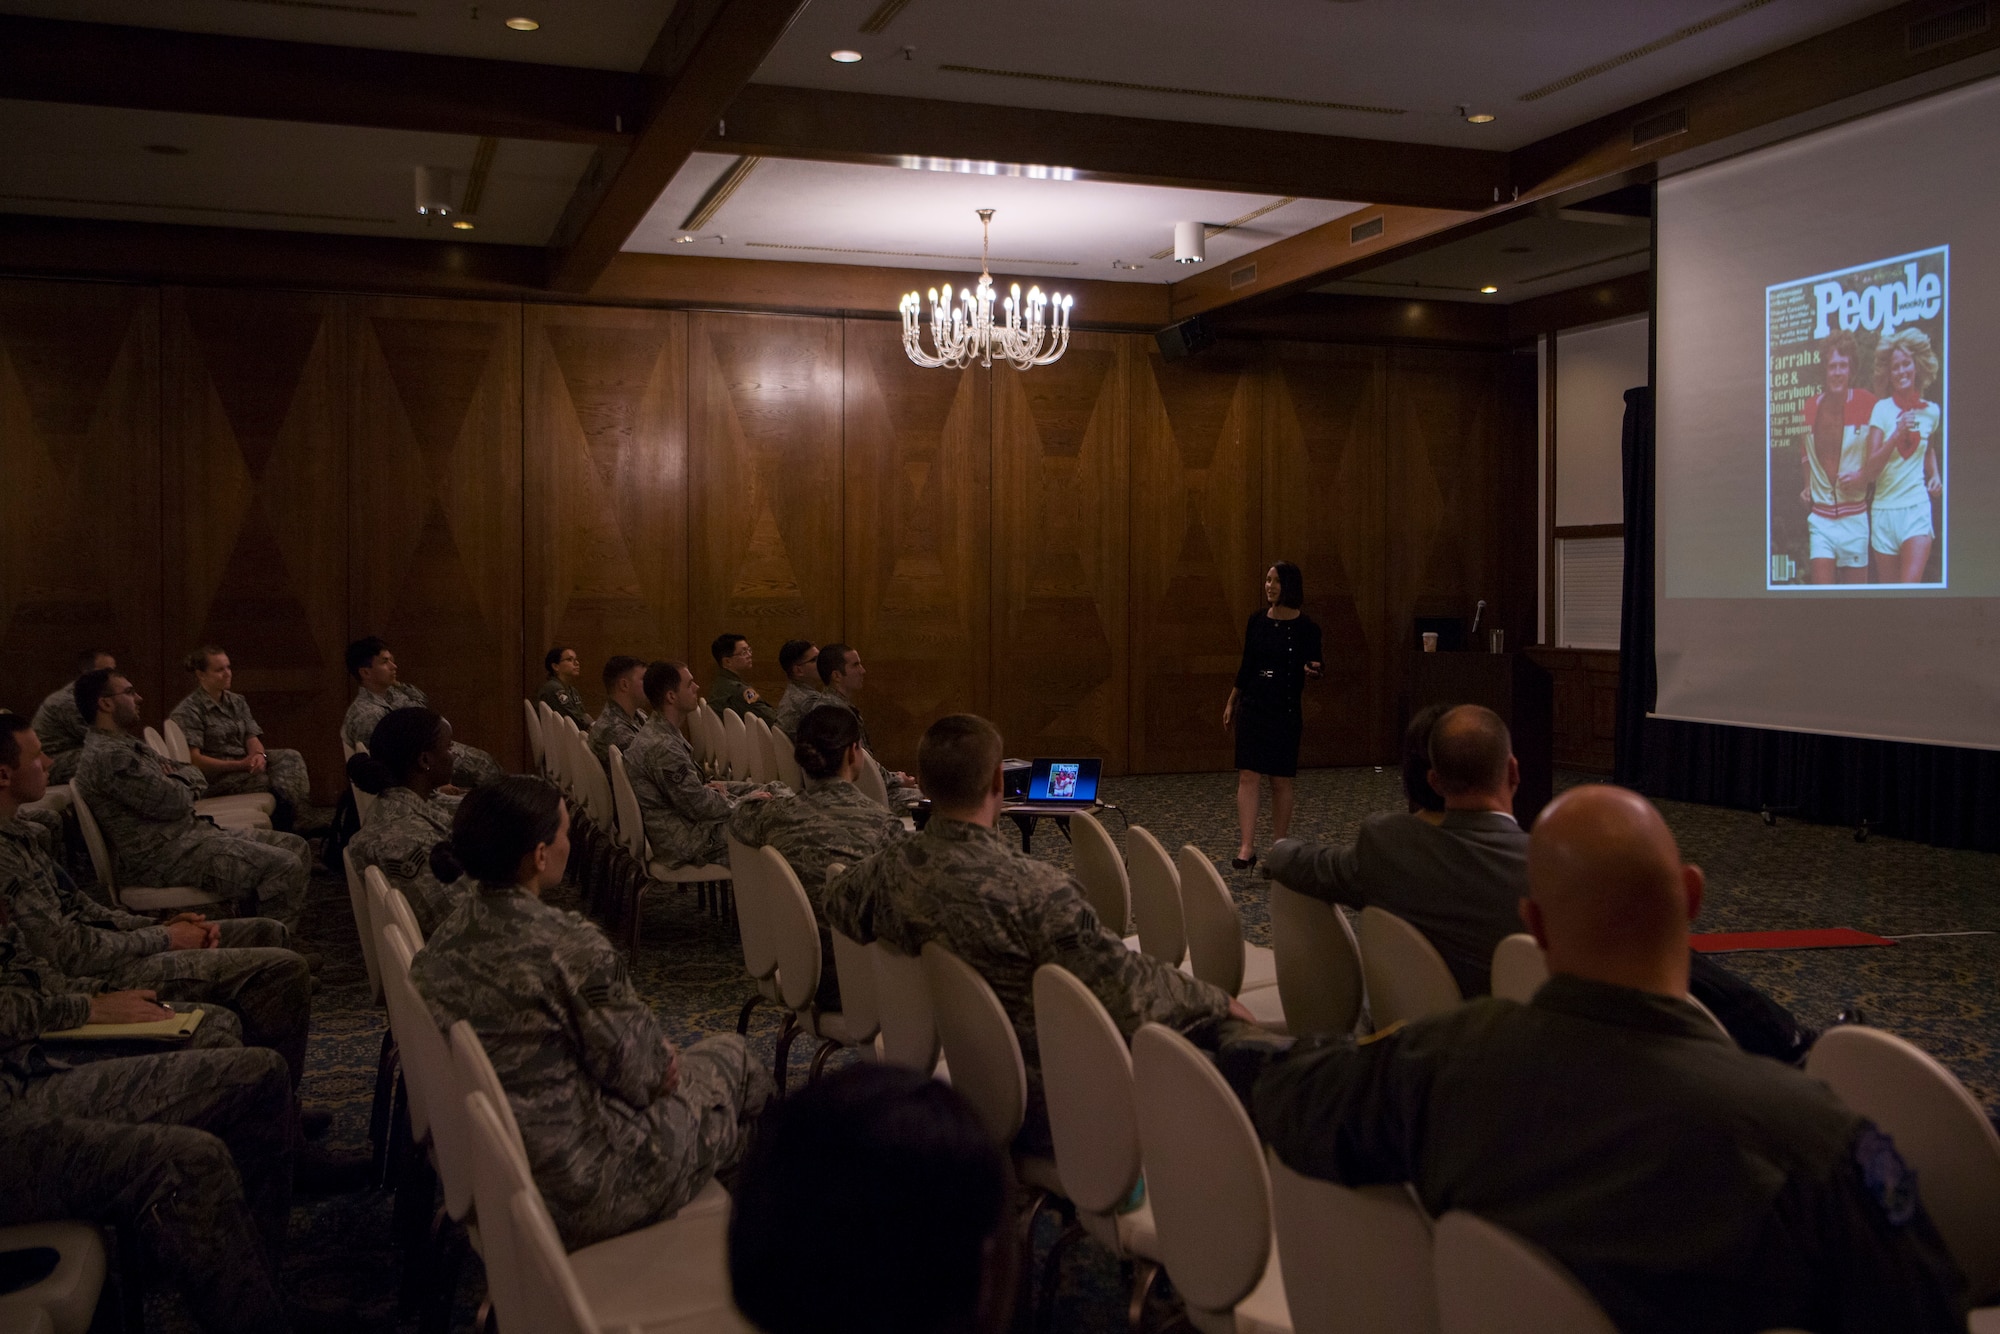 Retired U.S. Air Force Lt. Col. Jannell MacAulay, leadership and performance specialist consultant, speaks to Airmen at Ramstein Air Base, Germany, June 4, 2018. MacAulay spoke on the importance of mental exercises to improve decision-making capability, stress management, and overall performance in high-stress environments. (U.S. Air Force photo by Senior Airman Devin M. Rumbaugh)